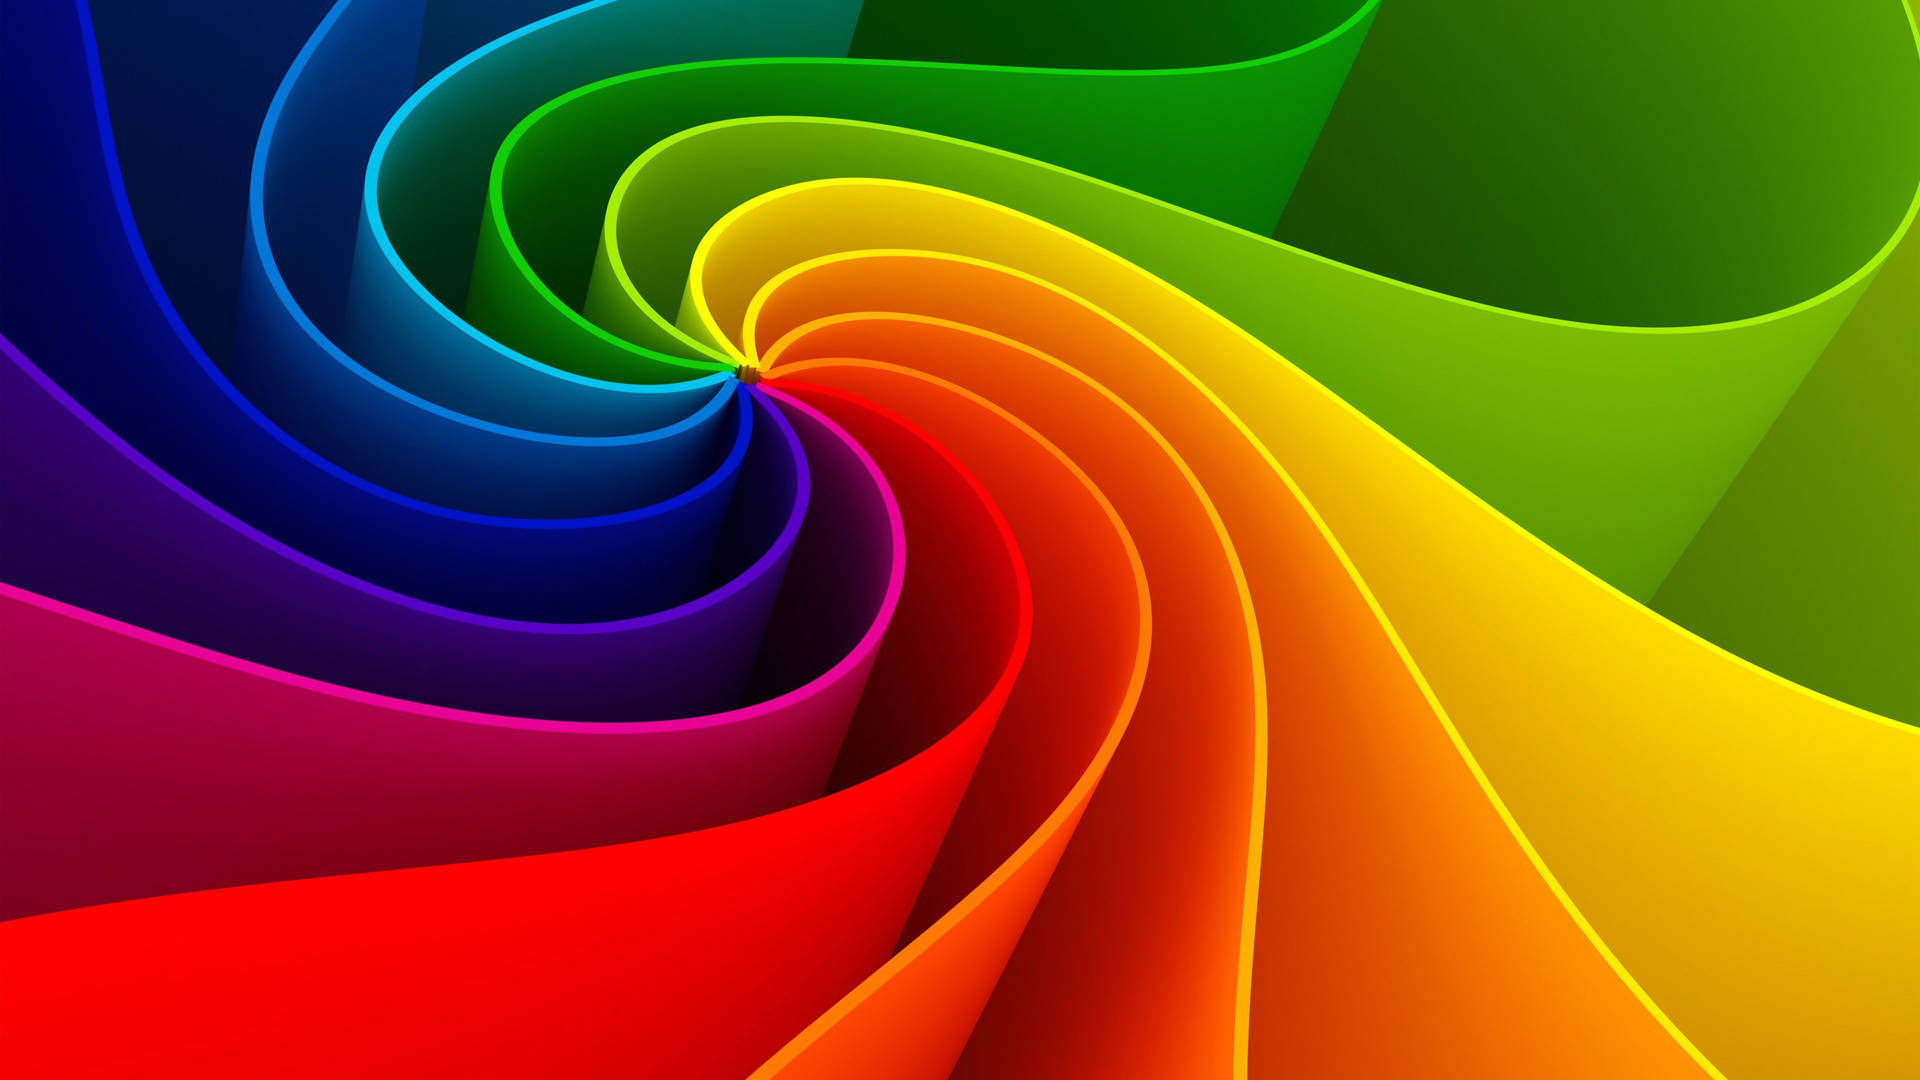 3d Spiral Wave Rainbow Background Picture